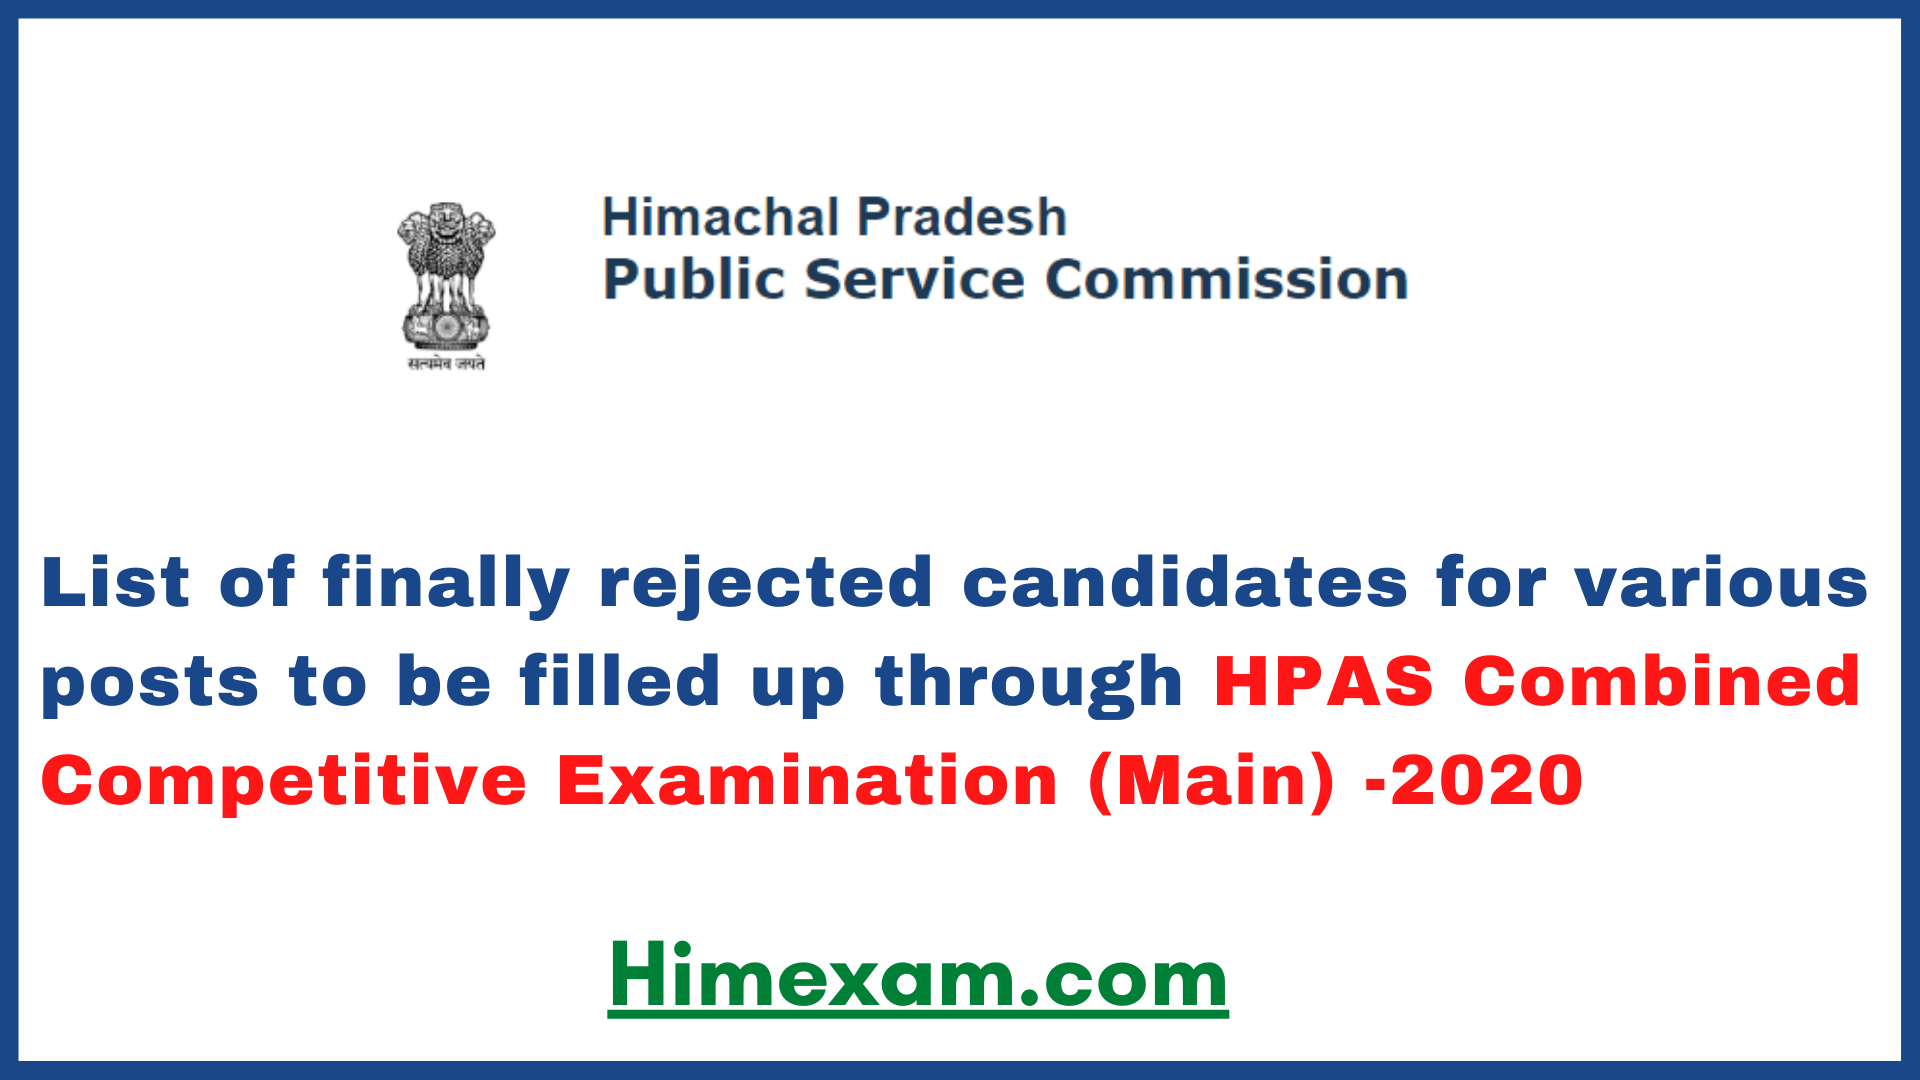 List of finally rejected candidates for various posts to be filled up through Himachal Pradesh Administrative Service Combined Competitive Examination (Main) -2020